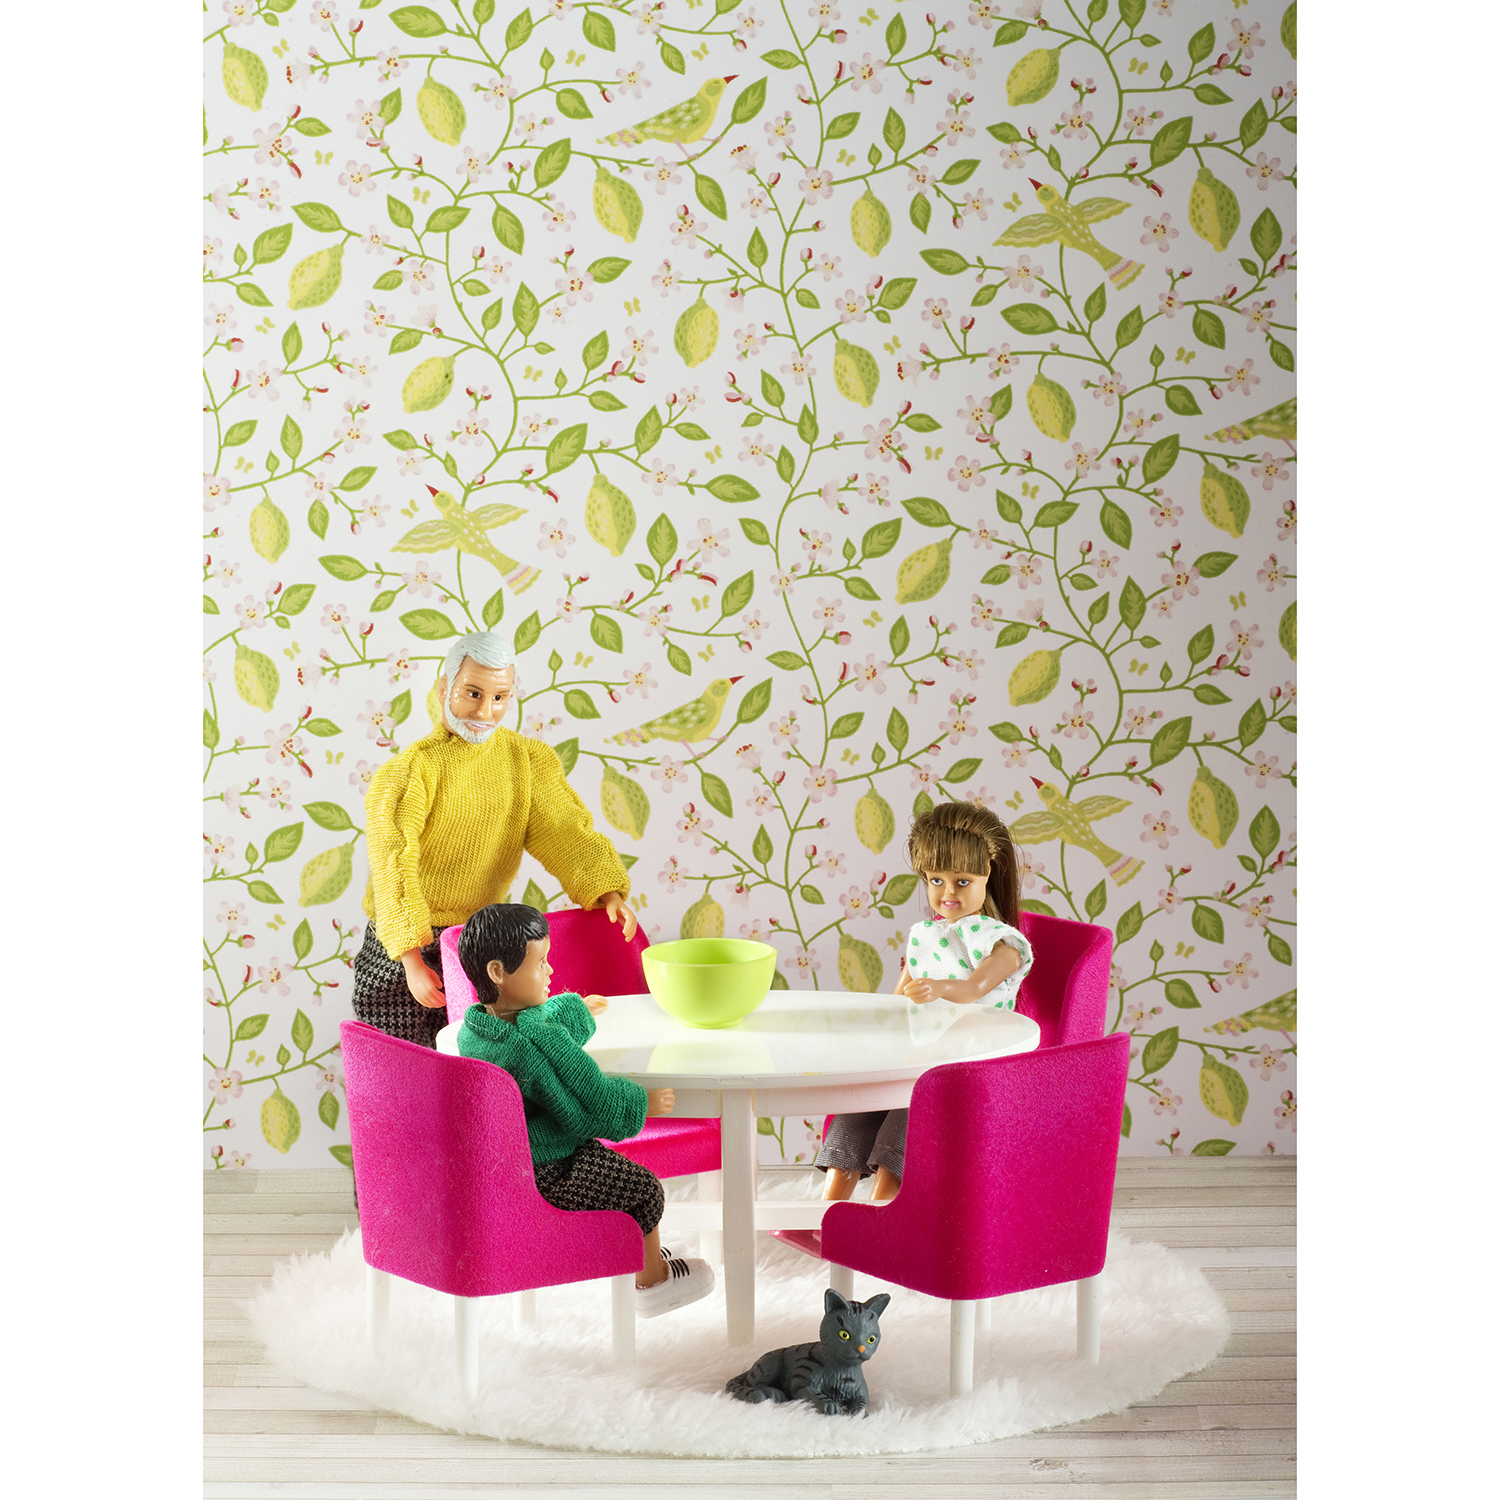 Doll house furniture & doll house accessories lundby dollhouse furniture dining table cerise